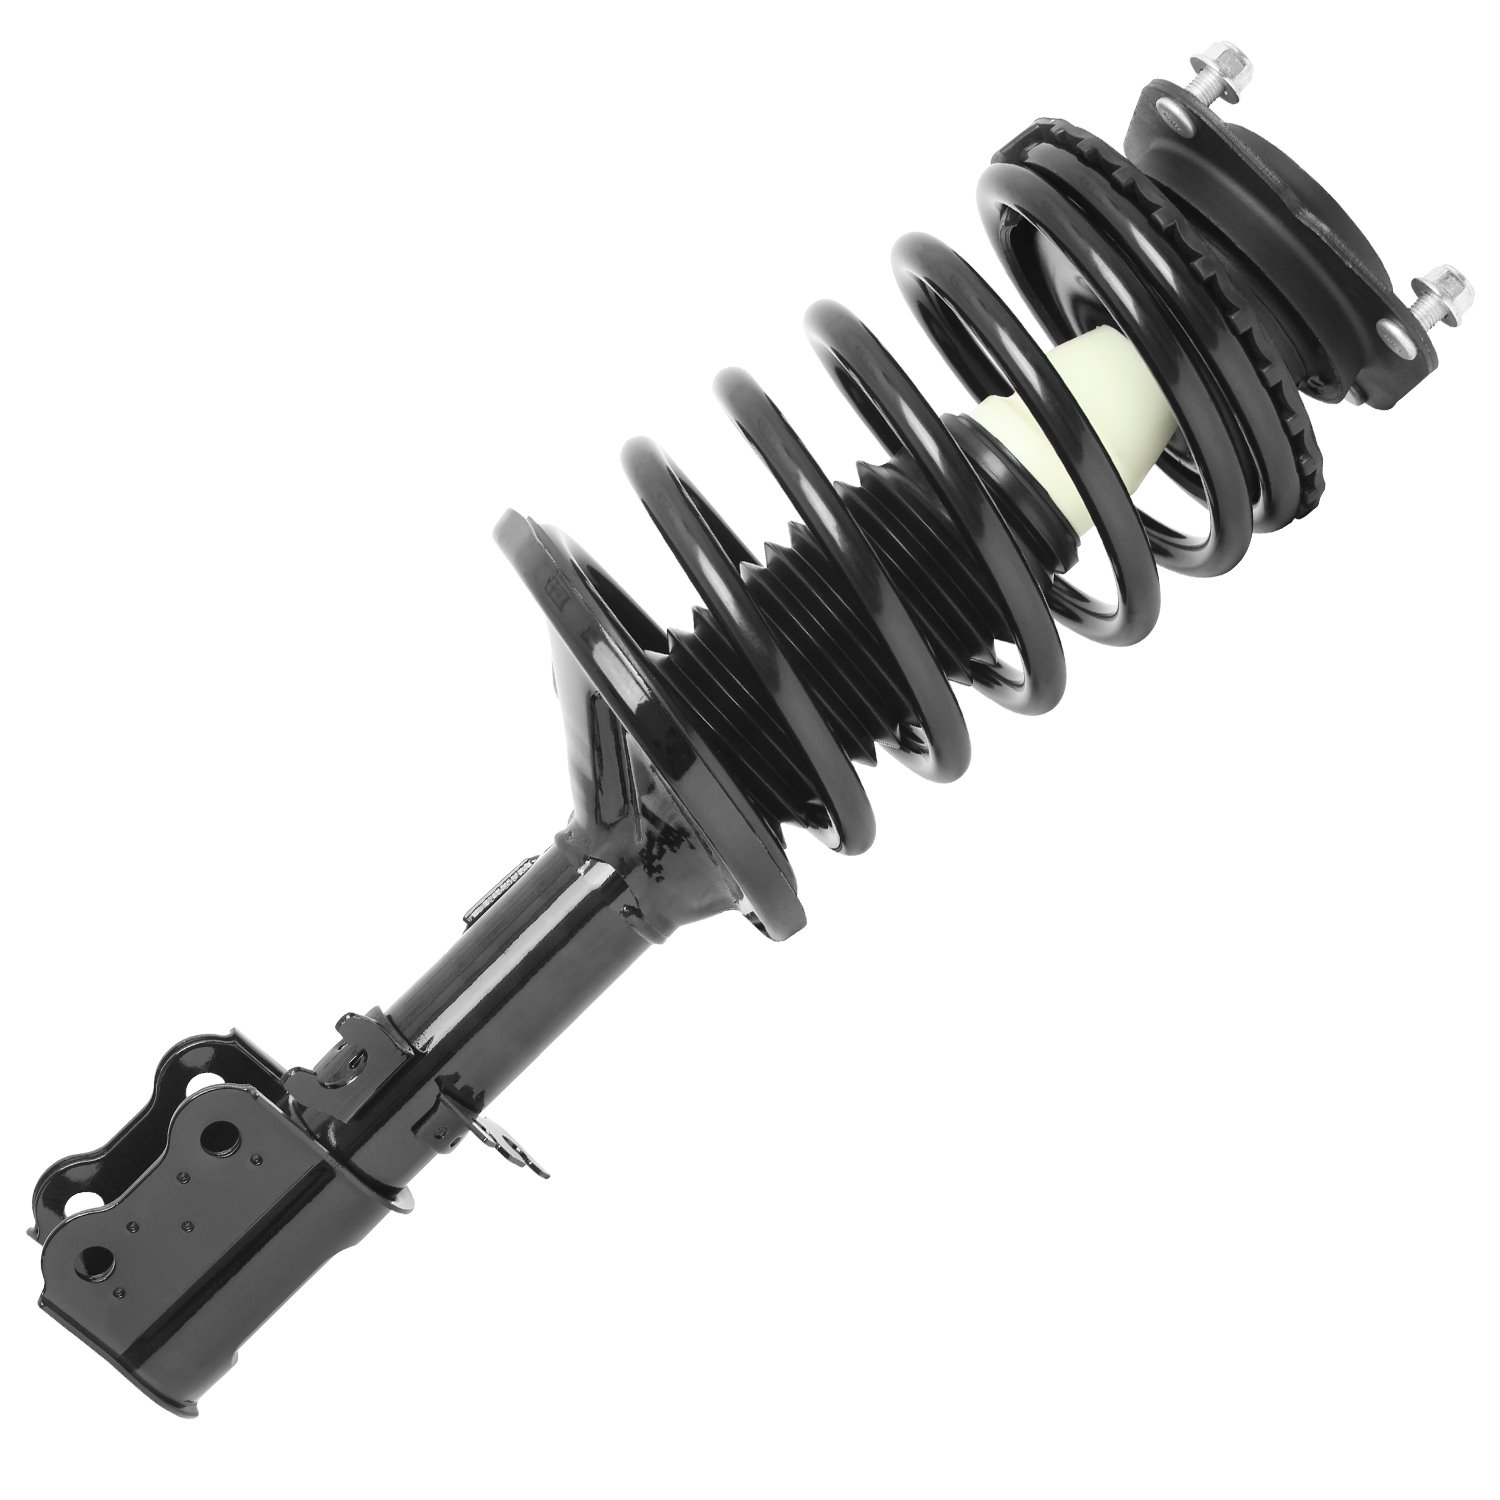 11833 Suspension Strut & Coil Spring Assembly Fits Select Kia Spectra